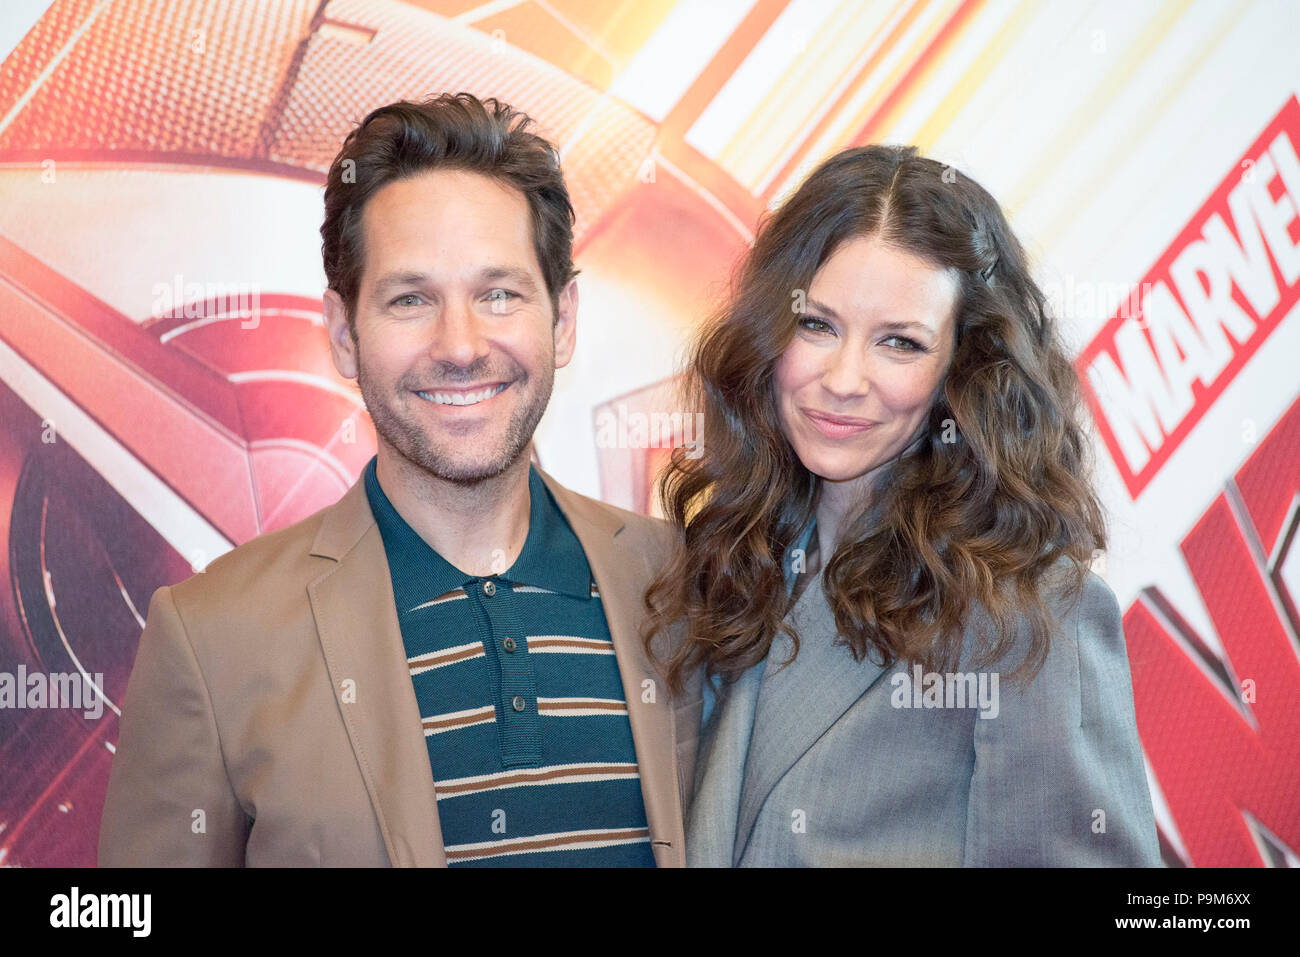 Rome, Italy. 19th July 2018. Paul Rudd and Evangeline Lilly attending the photocall of Ant-Man and the Wasp at Hotel De Russie in Rome Credit: Silvia Gerbino/Alamy Live News Stock Photo